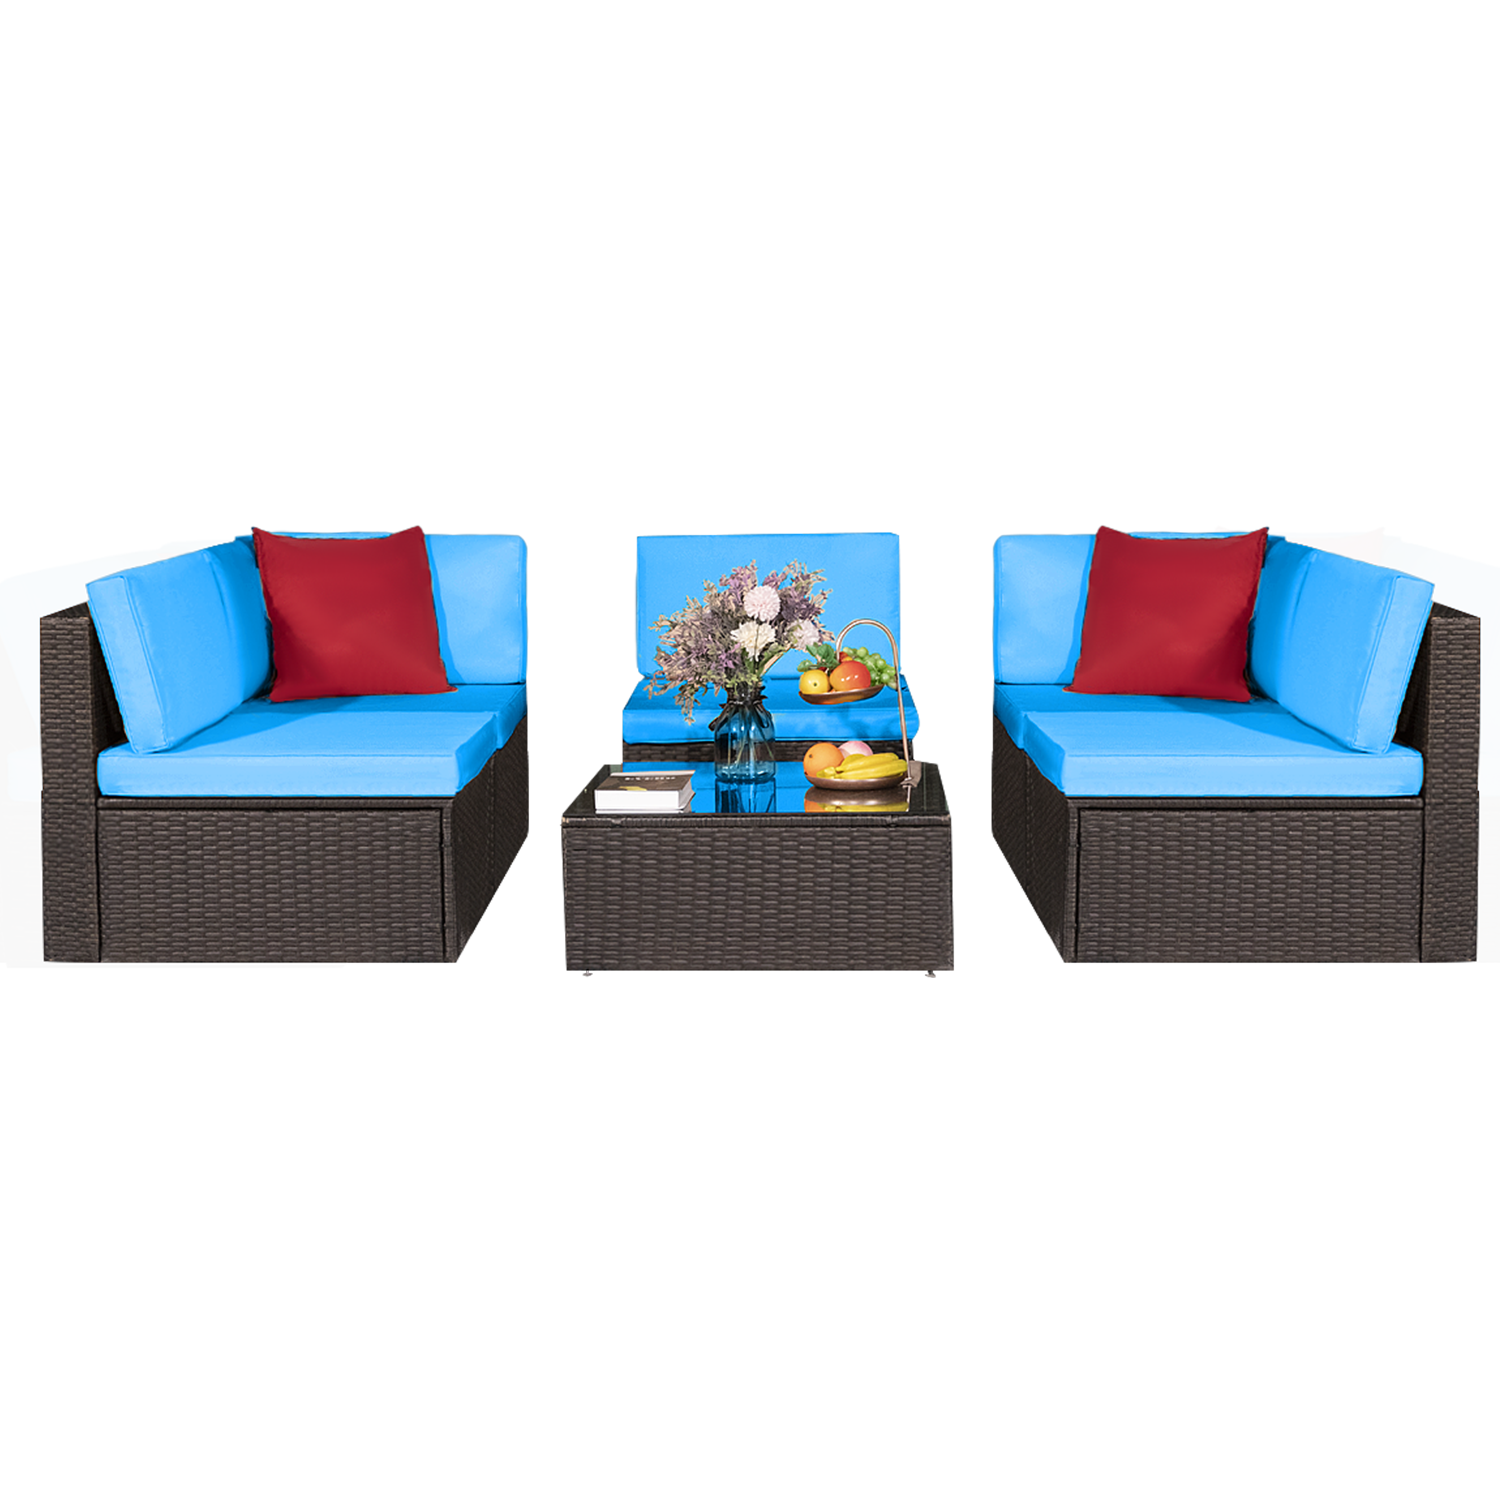 Lacoo 6 Pieces Outdoor Indoor Sectional Sofa Set PE Wicker Rattan Sectional Seating Group with Cushions Blue - image 1 of 8